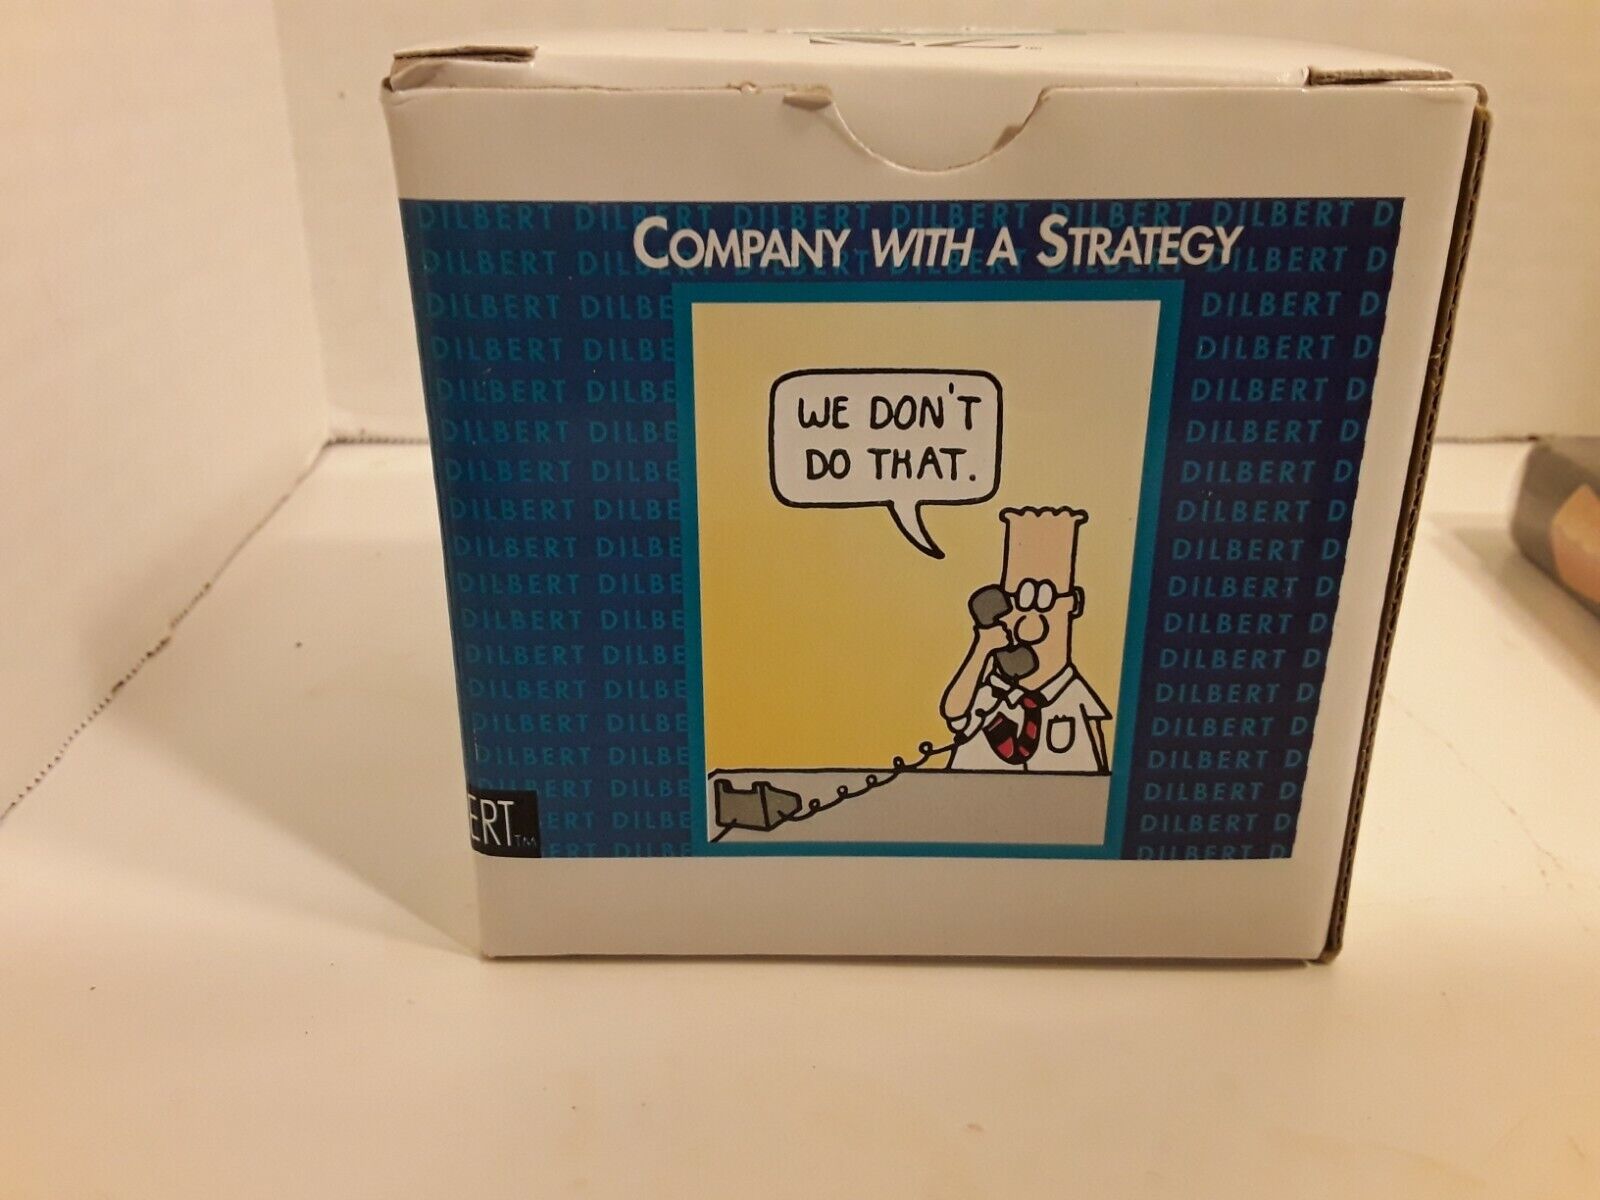 Dilbert Comics Company With A Strategy We Don't Do That Mug Cup With Box Read